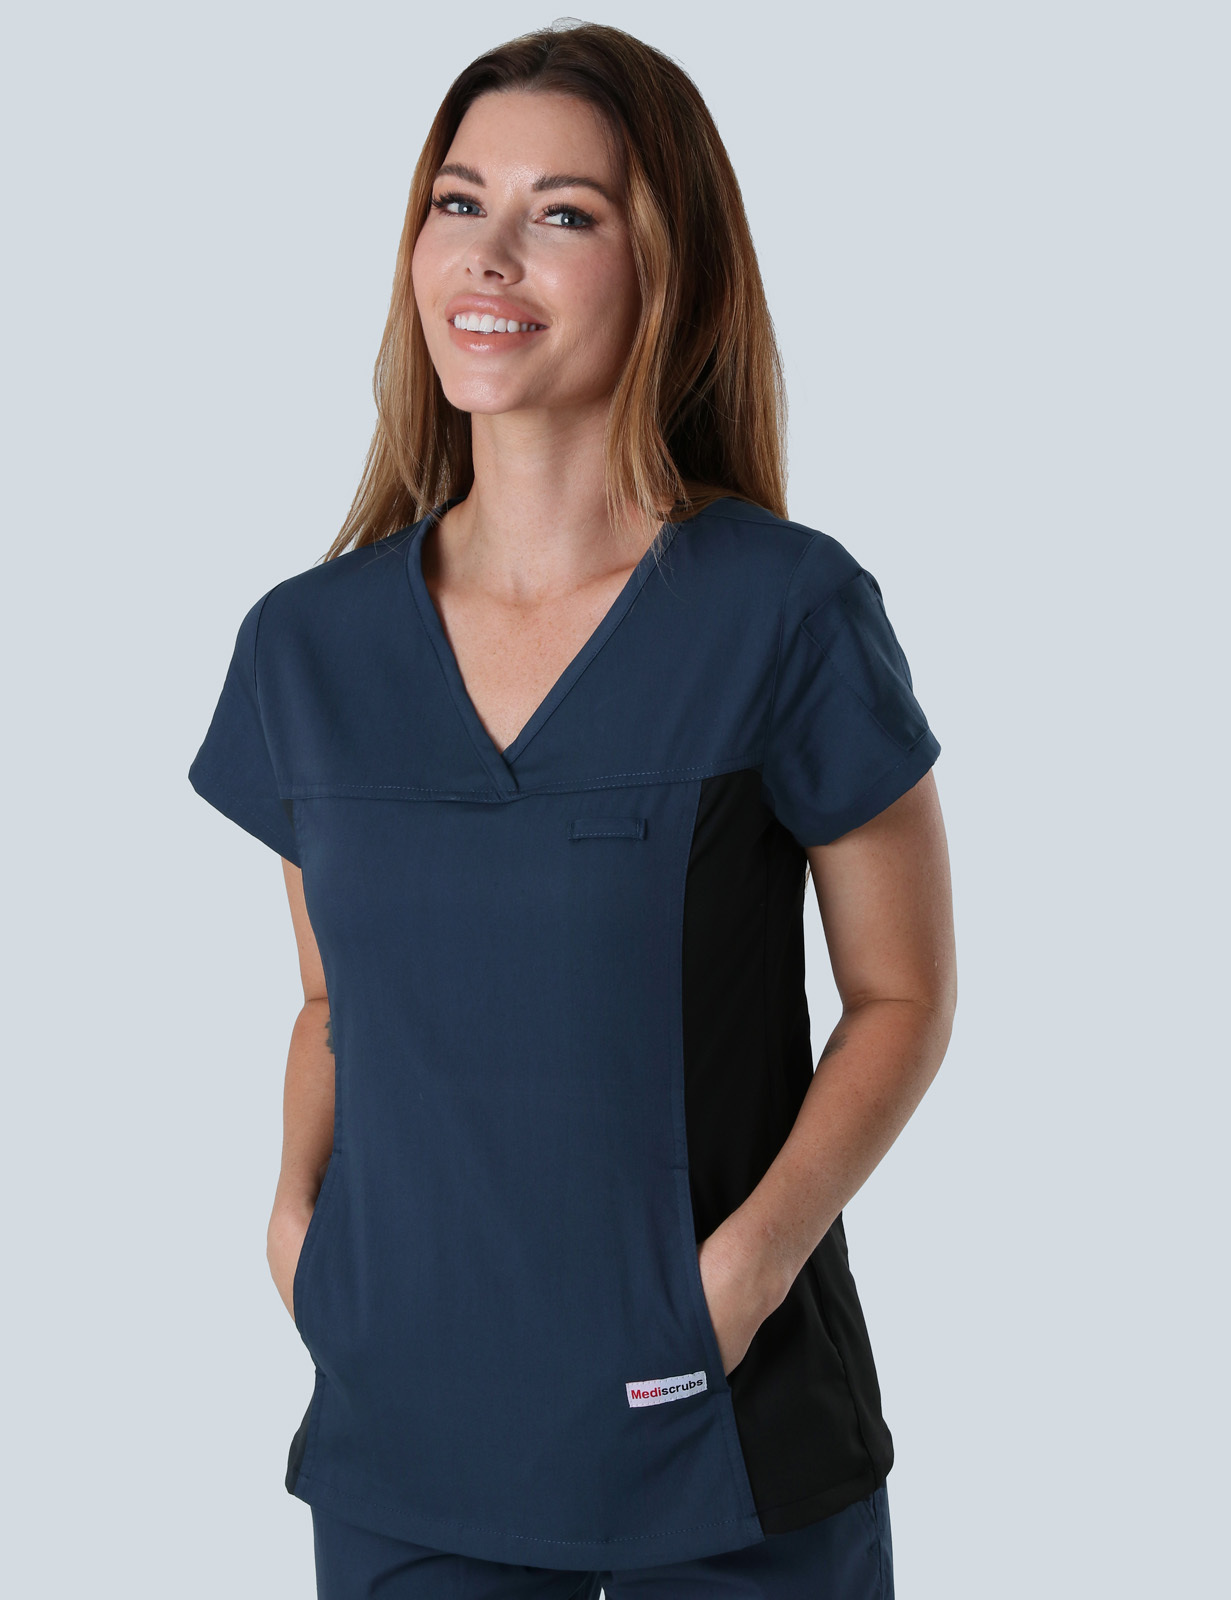 Children's Health Queensland (Women's Fit Spandex Scrub Top and Cargo Pants in Navy incl Logos)